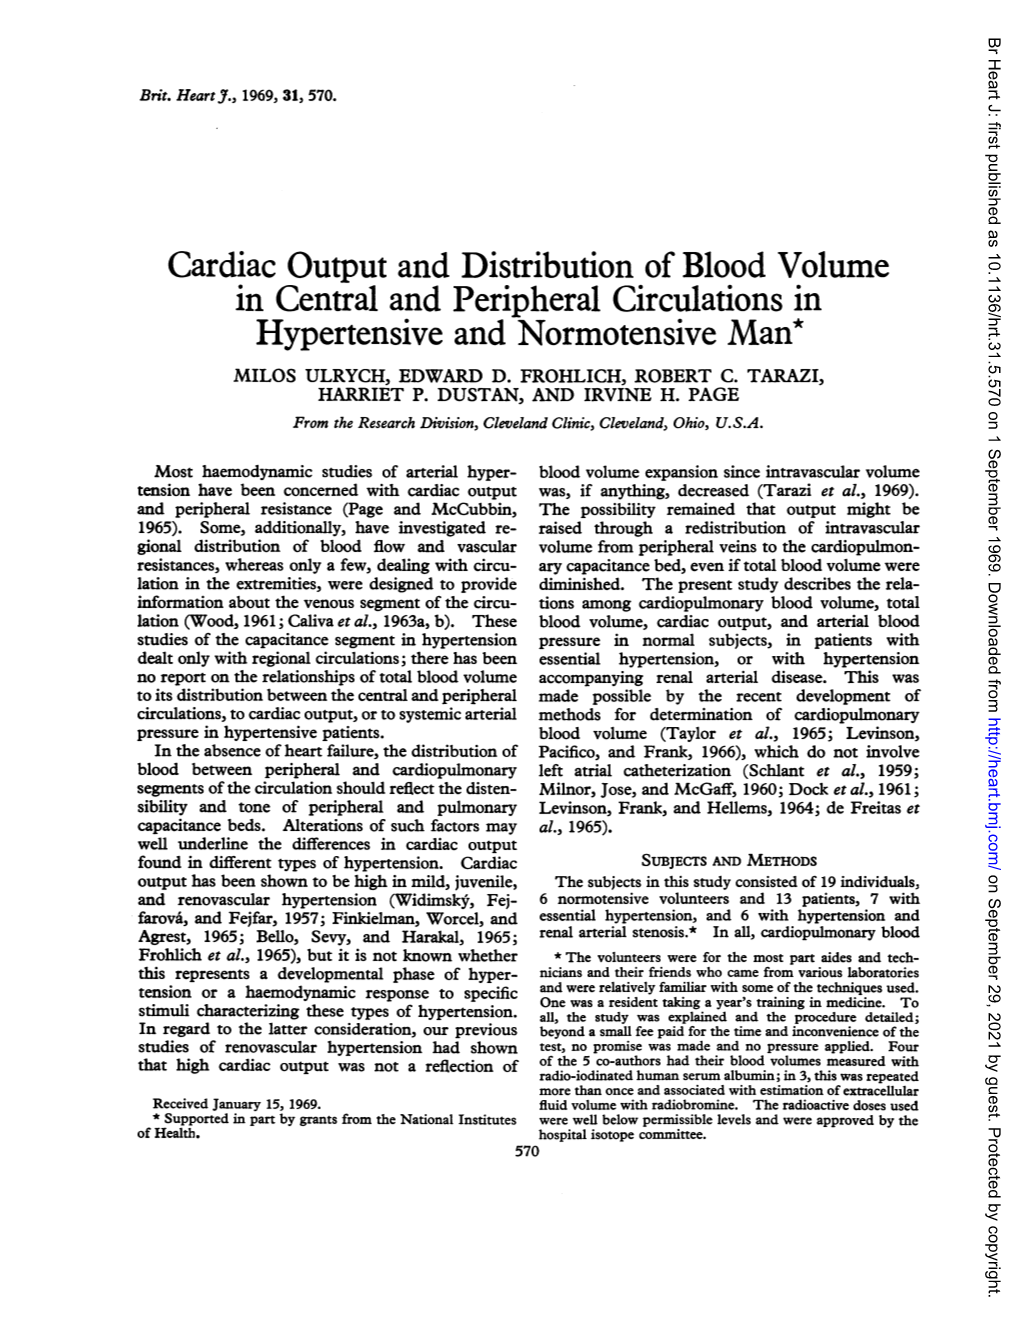 Cardiac Output and Distribution of Blood Volume in Central and Peripheral Circulations in Hypertensive and Normotensive Man* MILOS ULRYCH, EDWARD D